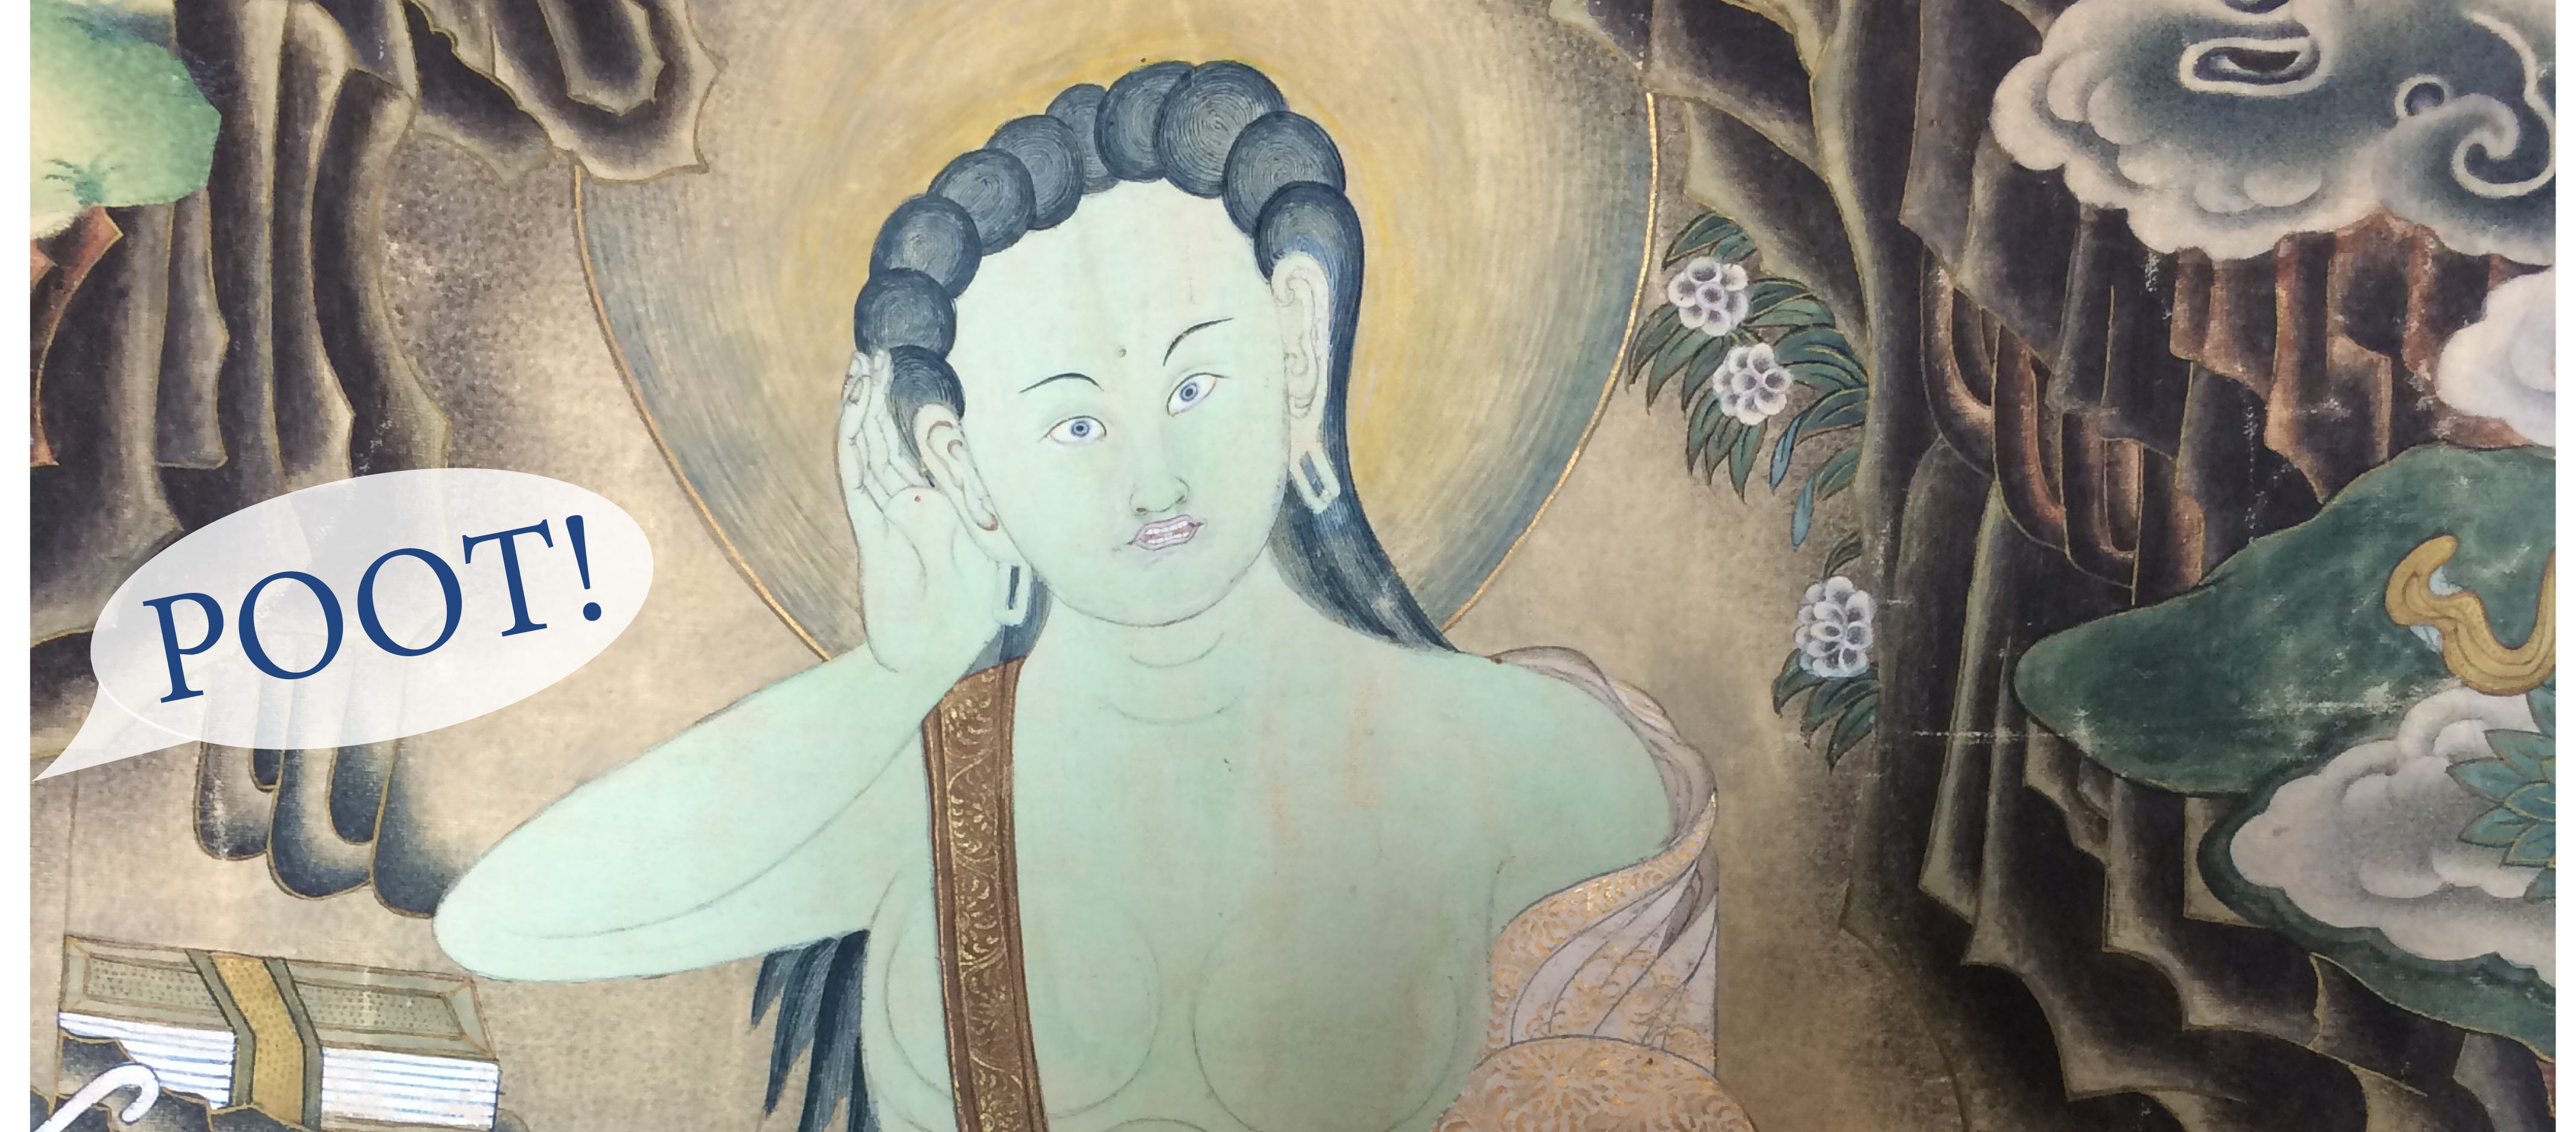 Photo of a Thangka painting of Milarepa from the chest up. Milarepa is posed with a hand to his ear, a startled expression on his green-skinned face. To the left of the image is a little speech bubble with the word "POOT!" in it, because foreshadowing with imagery is fun! 